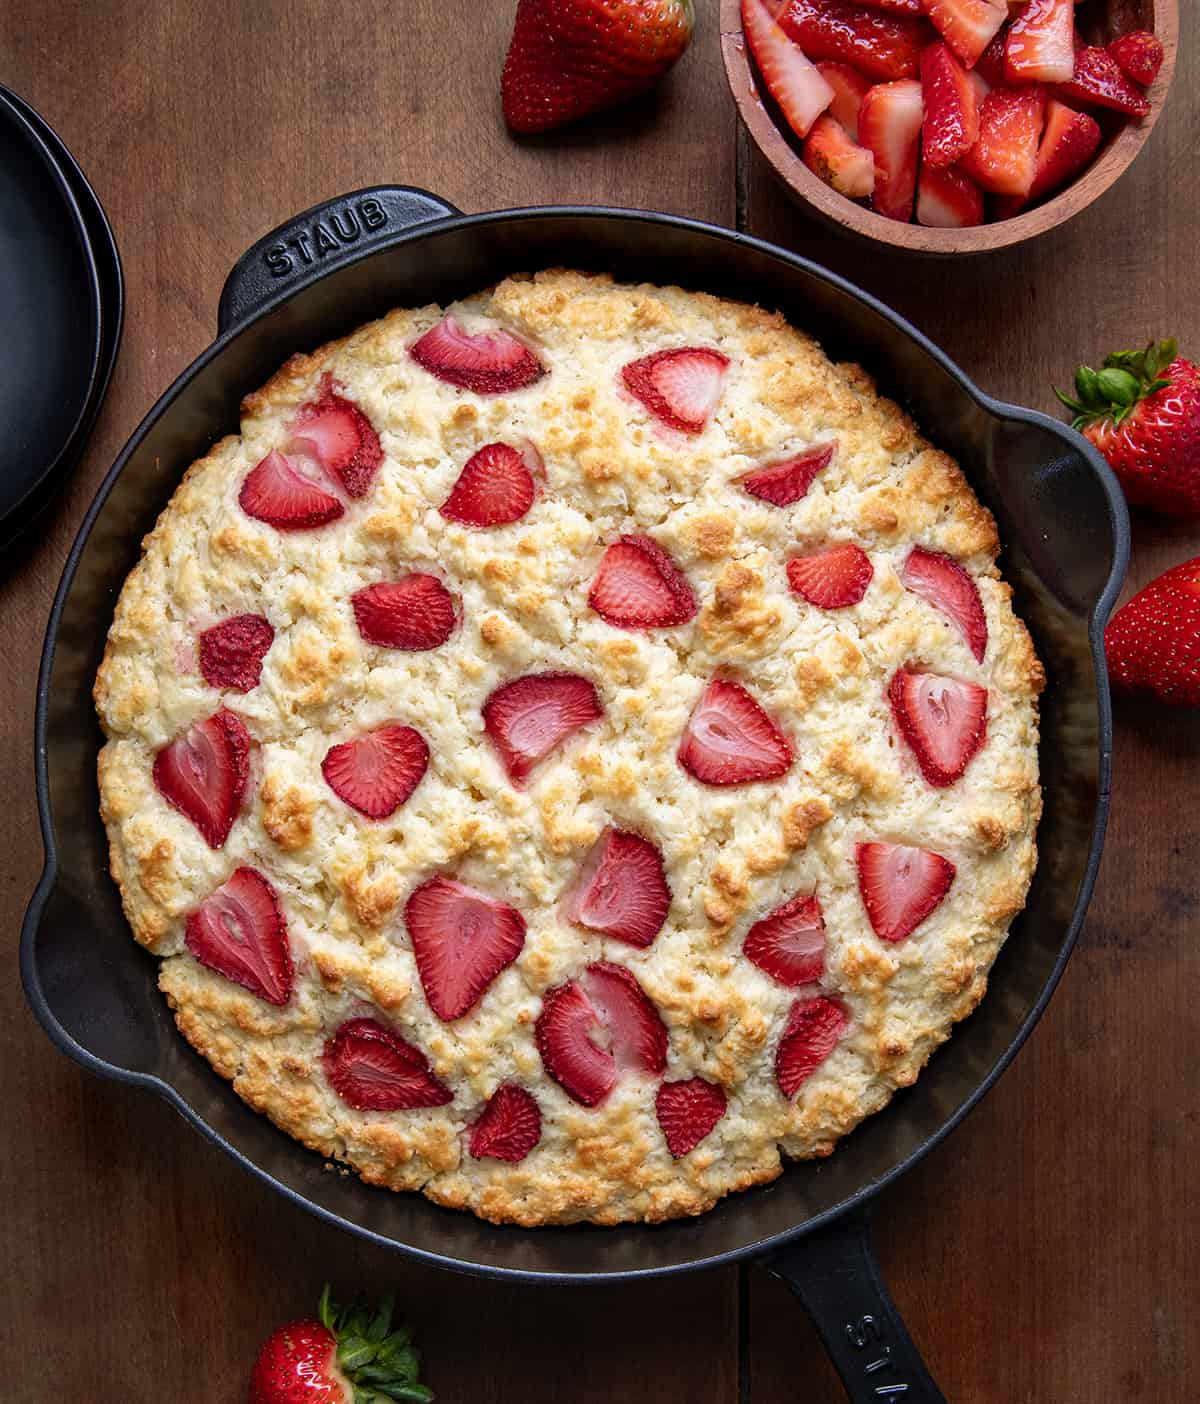 Skillet Strawberry Shortcake on a wooden table from overhead.